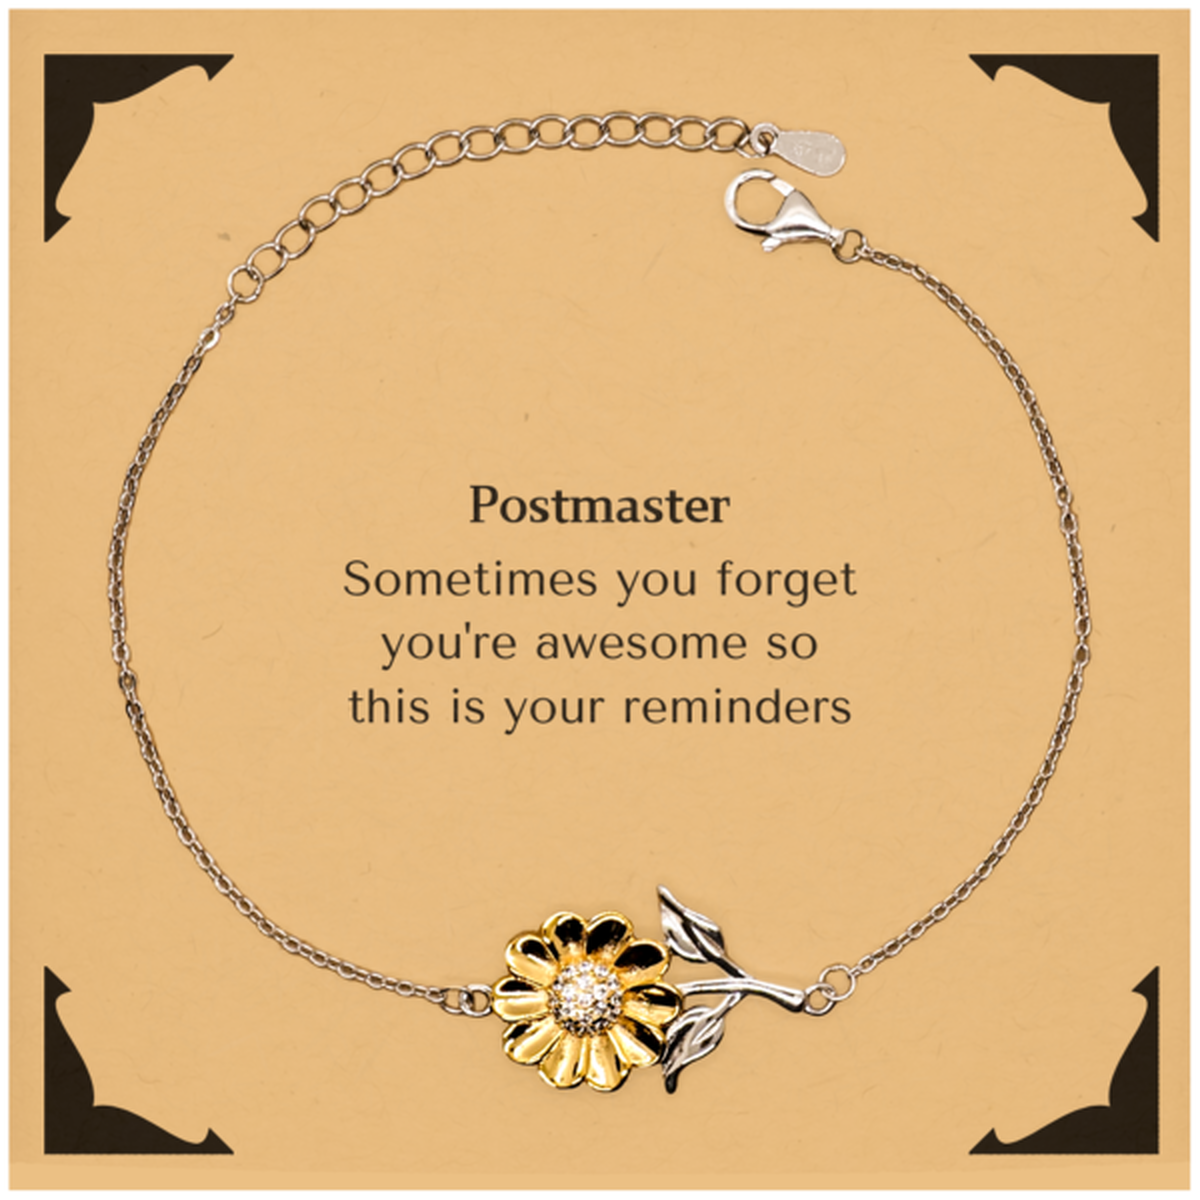 Sentimental Postmaster Sunflower Bracelet, Postmaster Sometimes you forget you're awesome so this is your reminders, Graduation Christmas Birthday Gifts for Postmaster, Men, Women, Coworkers